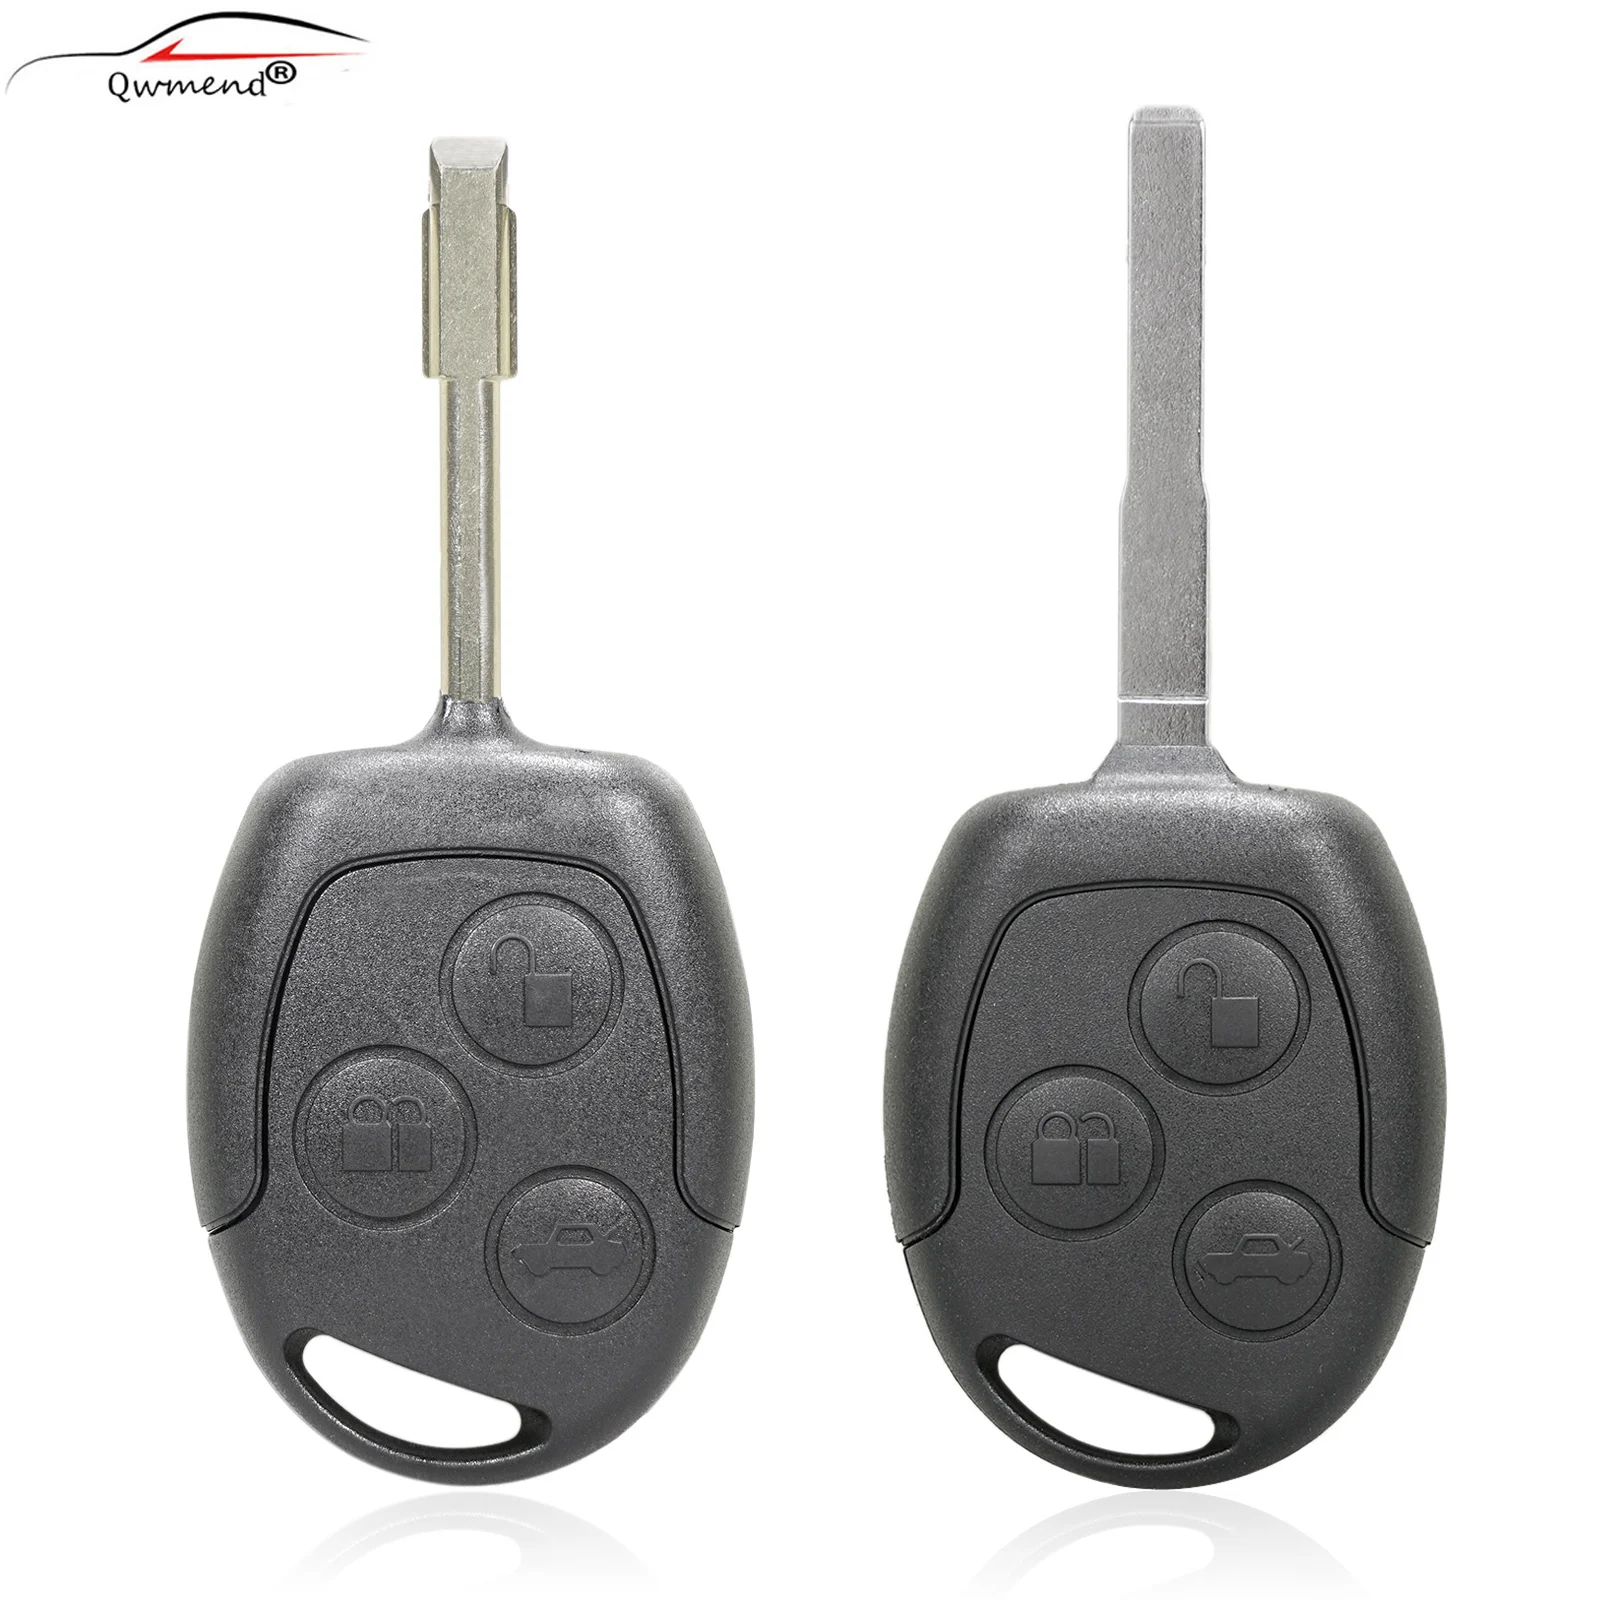 

QWMEND 3 Buttons Car Remote Key Shell Fob For Ford Focus Mondeo Festiva Fusion Suit Fiesta KA Key Case Replacement